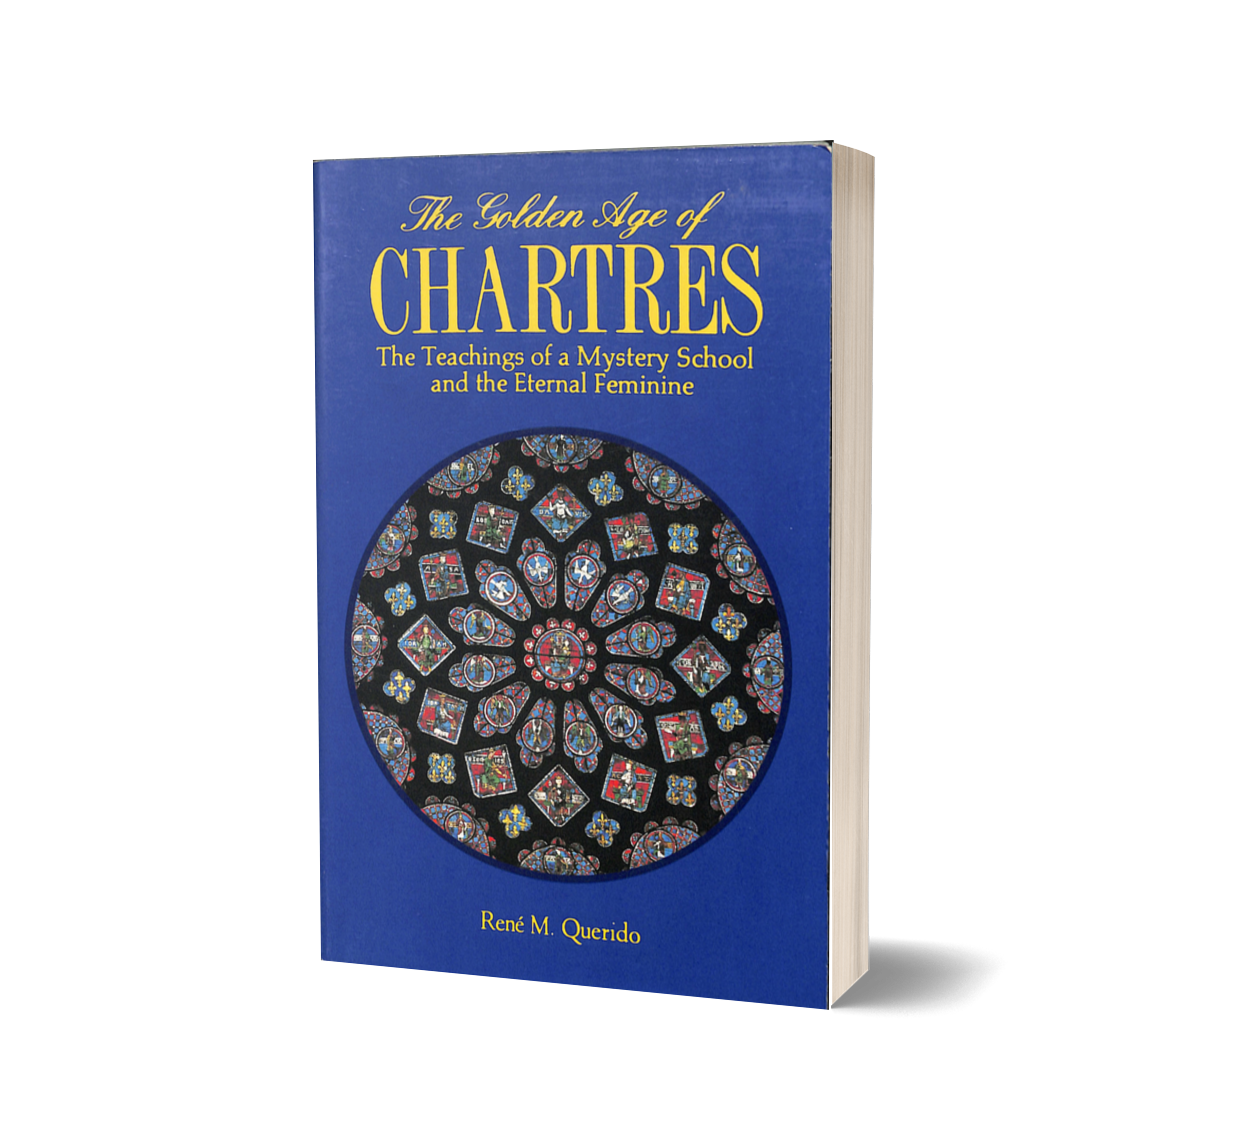 The Golden Age of Chartres